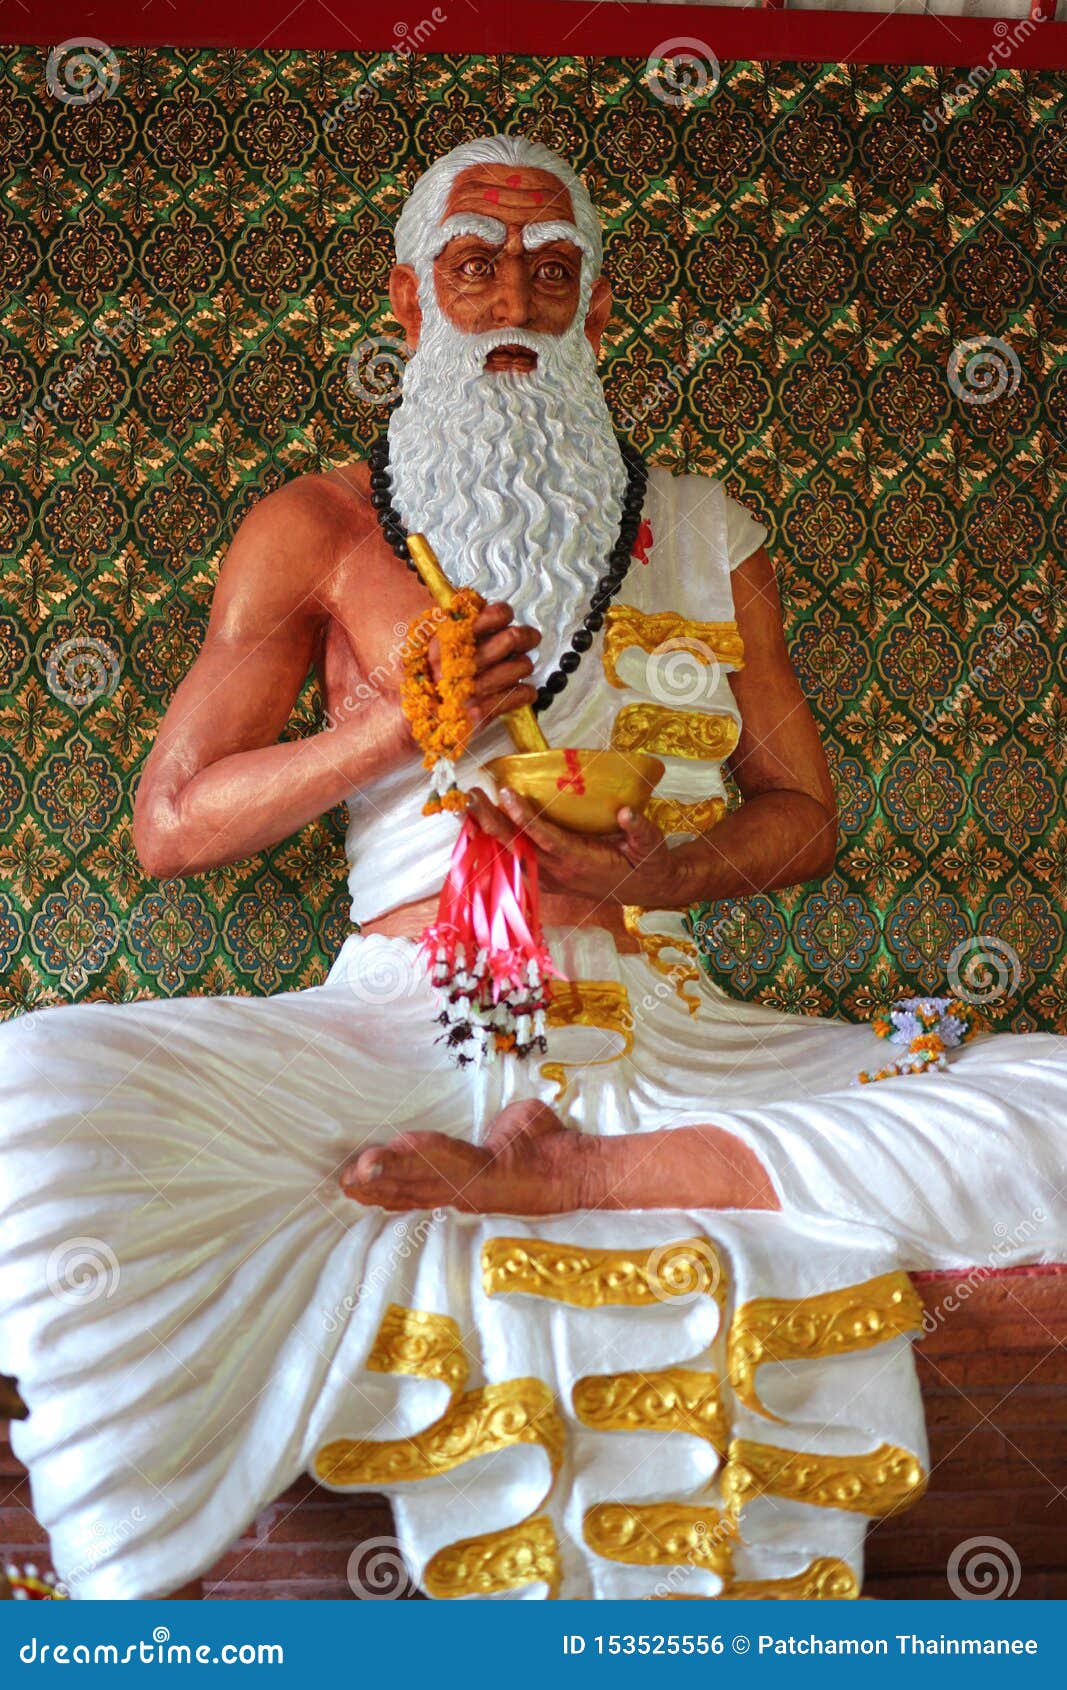 the rishi statue is the author of the vedas or who saw the rishi as a priest.